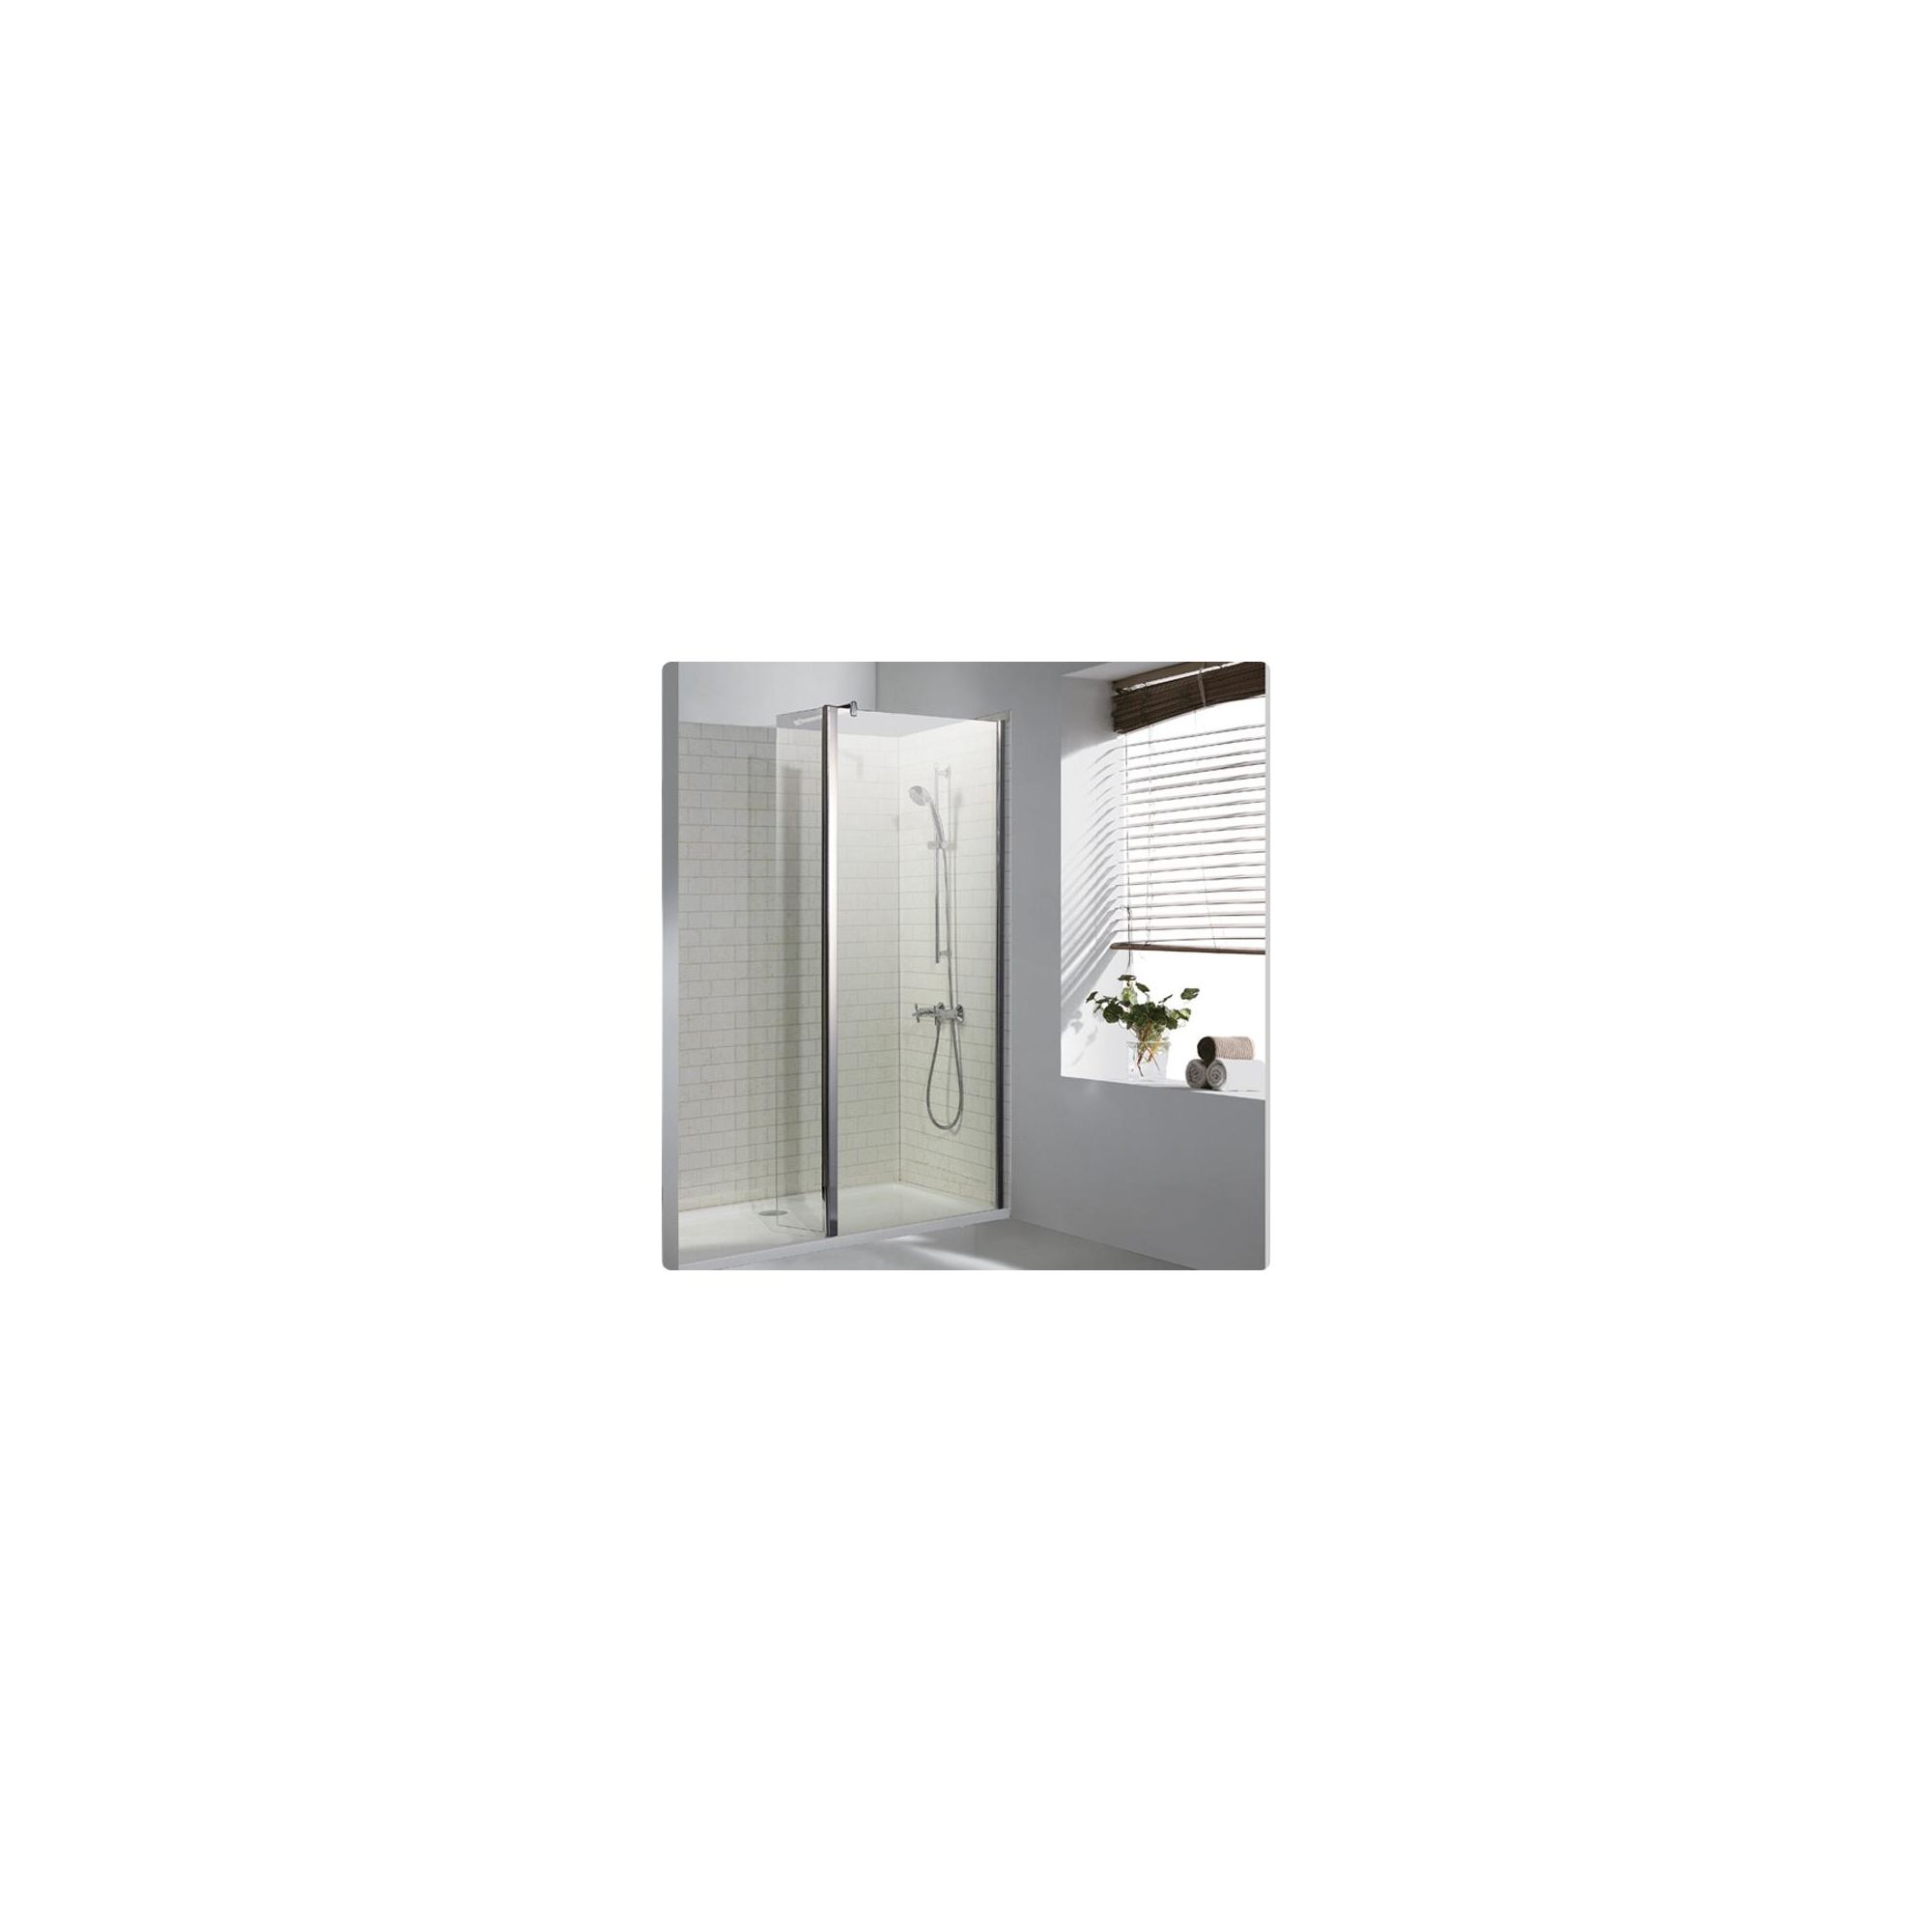 Duchy Choice Silver Walk-In Shower Enclosure 1400mm x 700mm (Complete with Tray), 6mm Glass at Tesco Direct